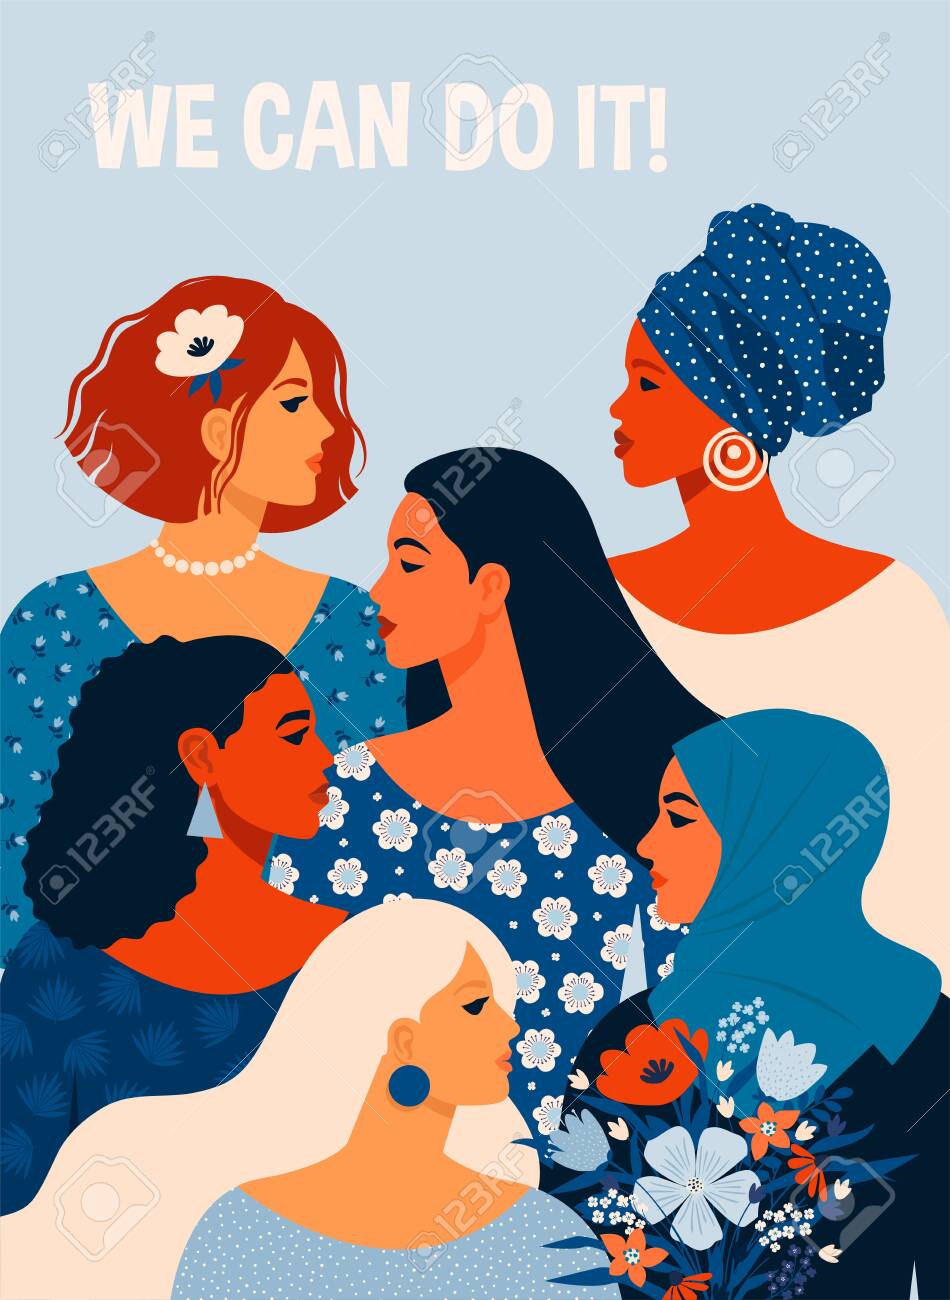 we-can-do-it-poster-international-womens-day-vector-illustration-with-women-different-nationalities_Hari-Perempuan-Internasional_Creator-Angelina-Chirkova